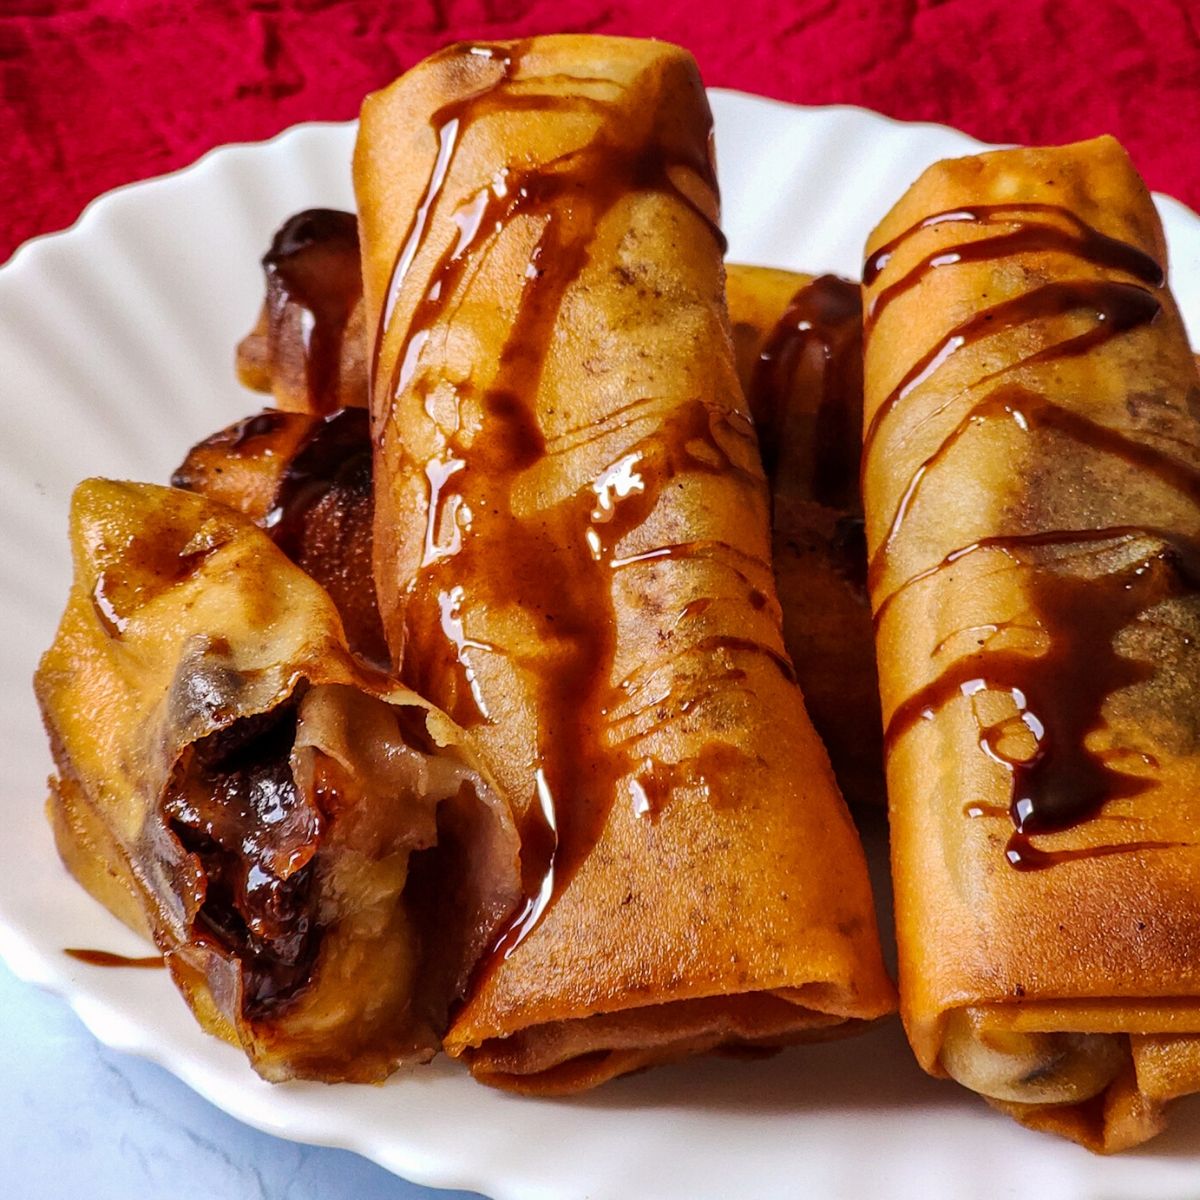 Chocolate Banana Spring rolls drizzled with chocolate sauce served on a white plate kept on a red table napkin